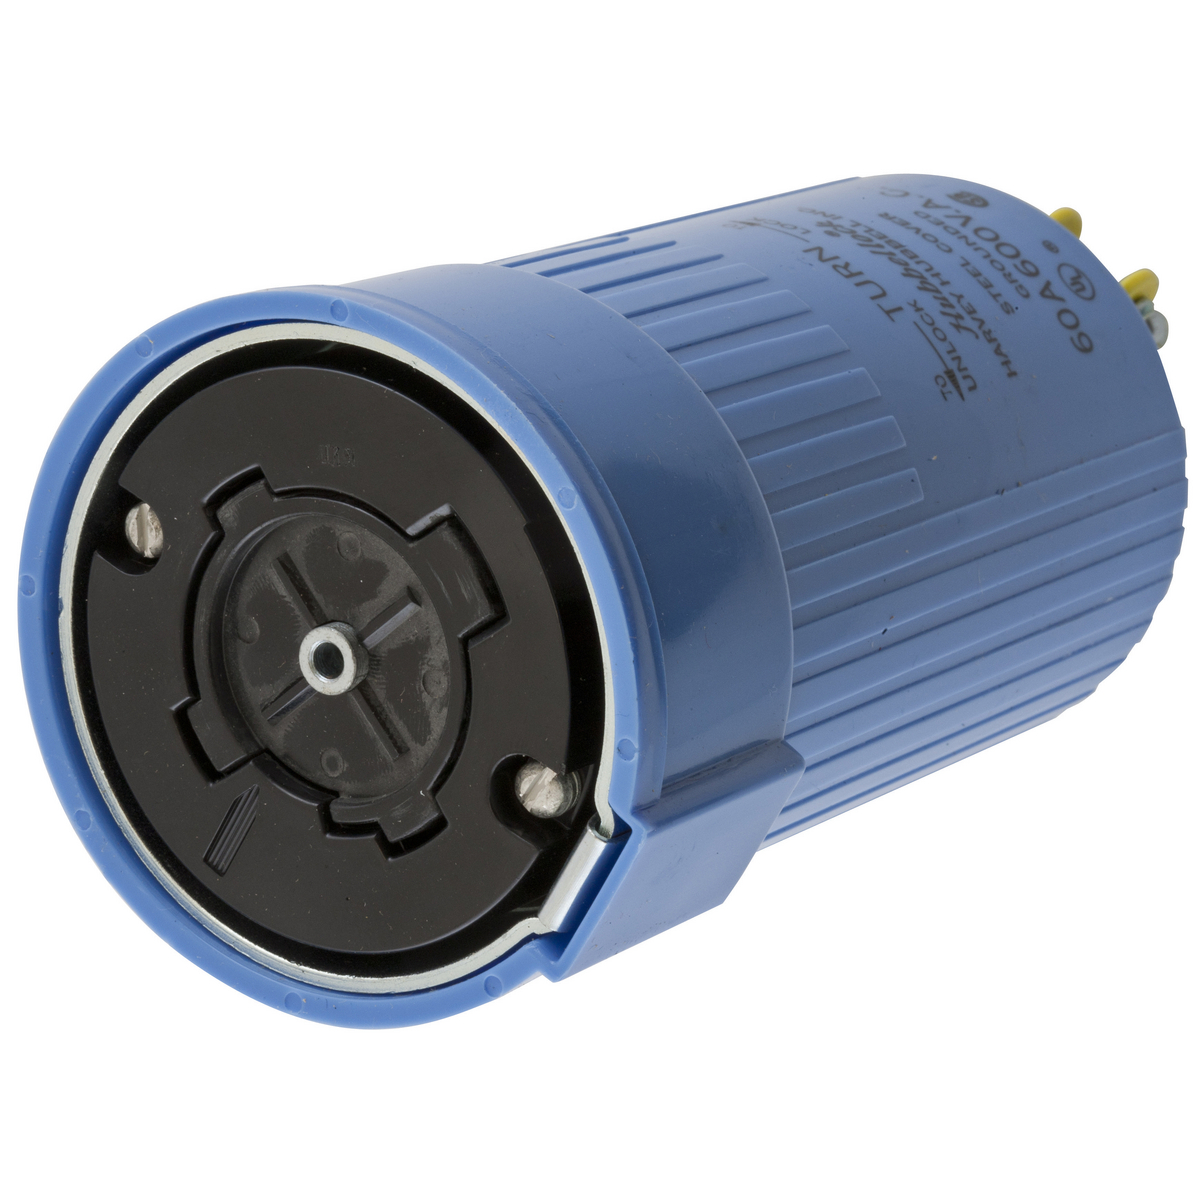 Connector 60A | Terminal, Hubbellock, Locking AC, 600V Grounding, Blue Industrial, Female 5-Wire Devices, NEMA, 4-Pole Body, | HBL26516 Screw Hubbell Non